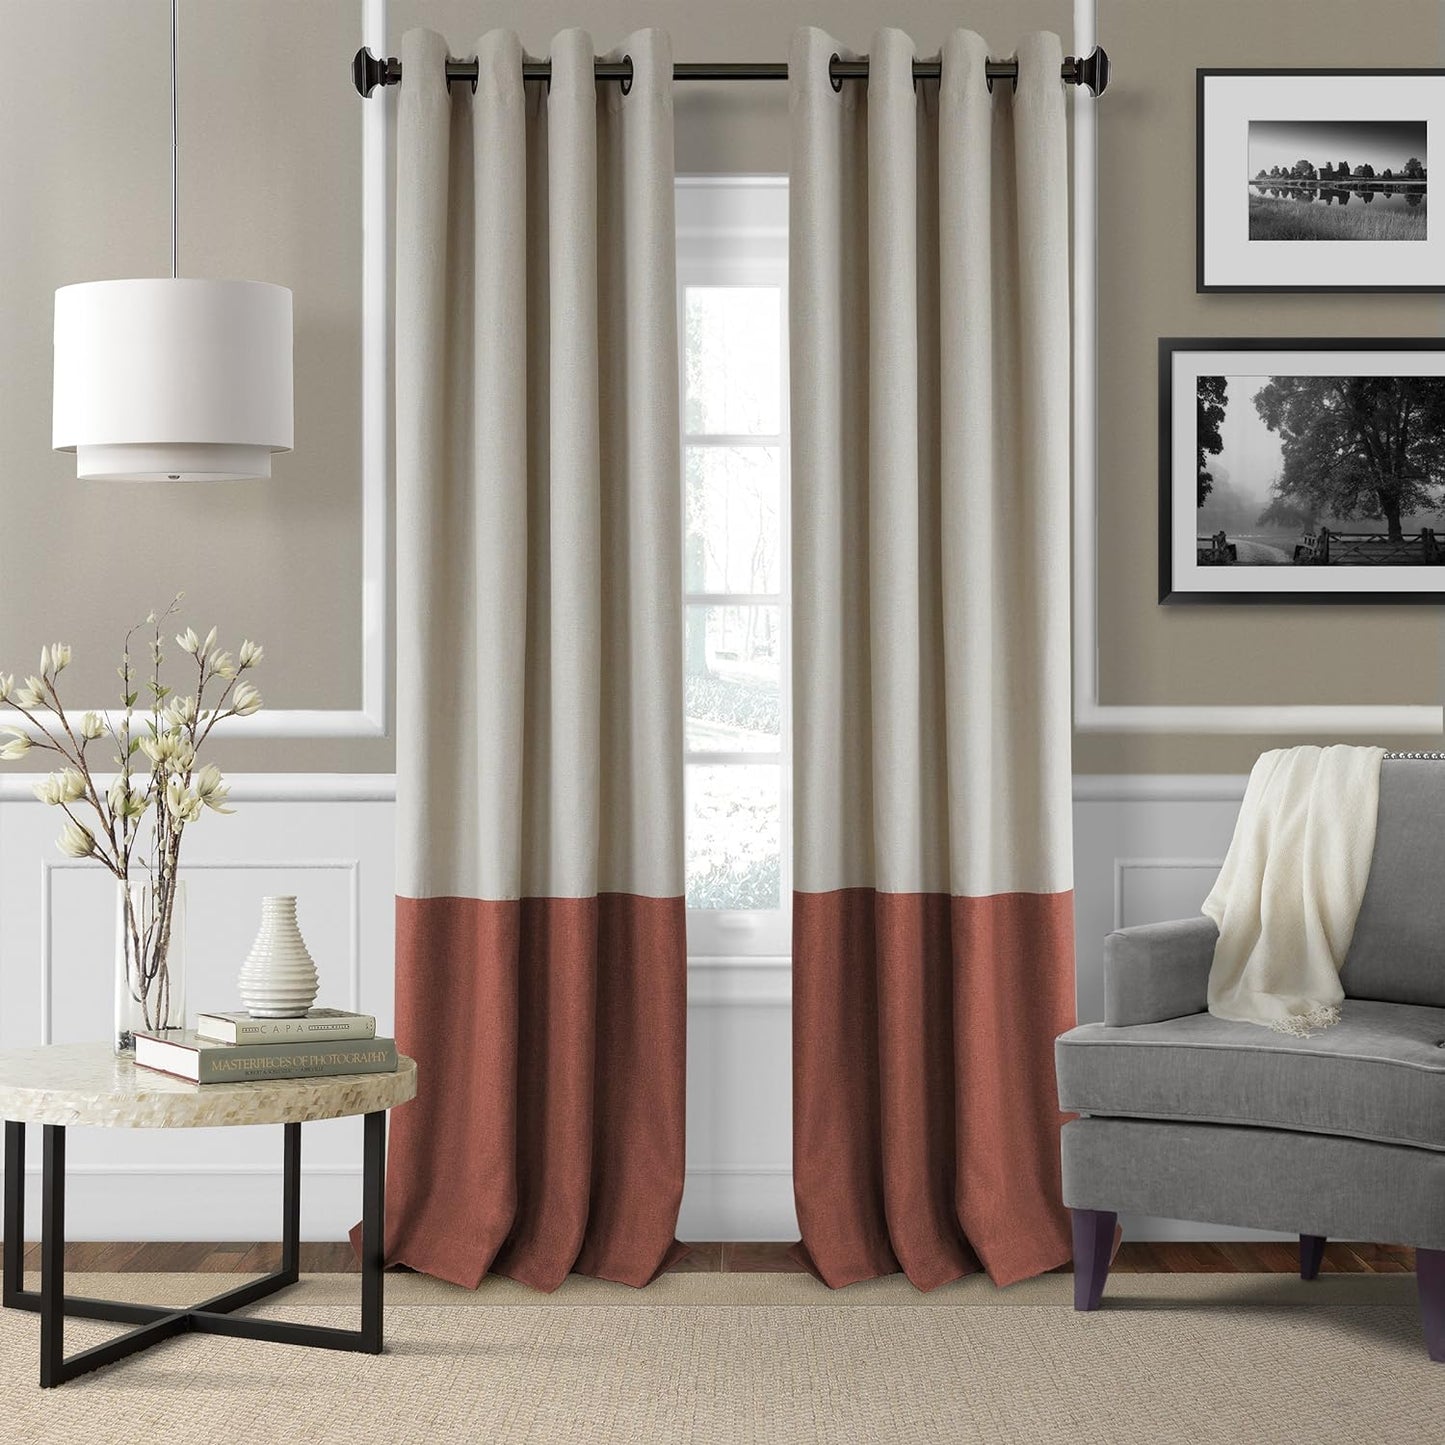 Elrene Home Fashions Braiden Color-Block Blackout Window Curtain, Single Panel, 52 in X 84 in (1 Panel), Linen  Elrene Home Fashions Rust 52" X 95" (1 Panel) 